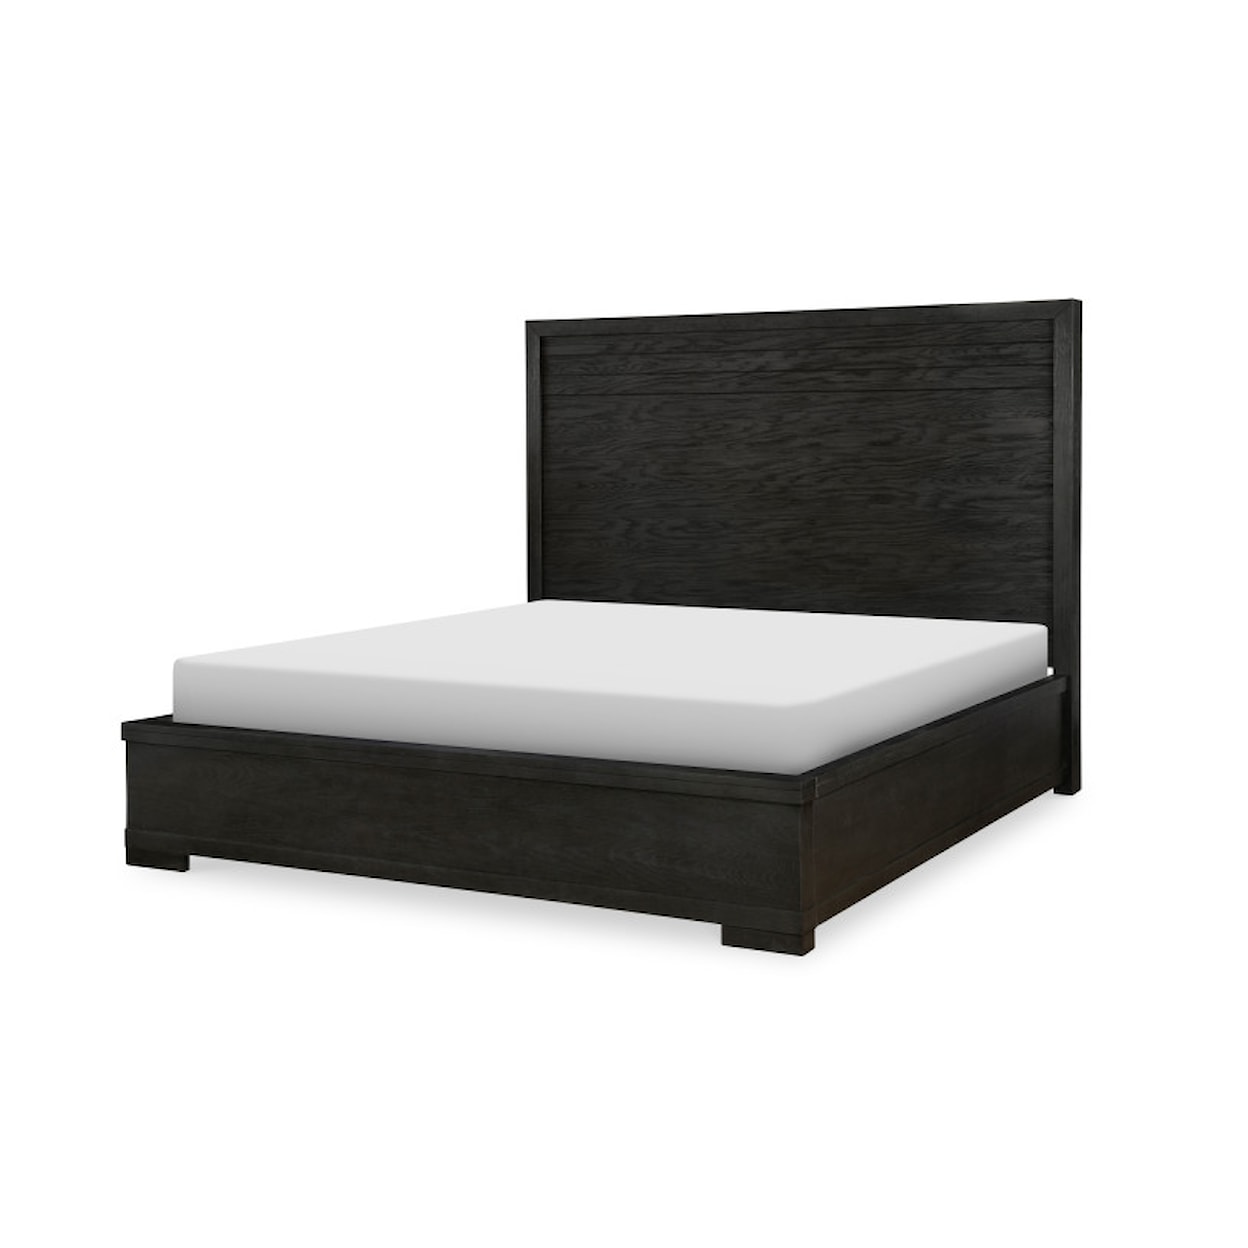 Legacy Classic Westwood California King Panel Bed